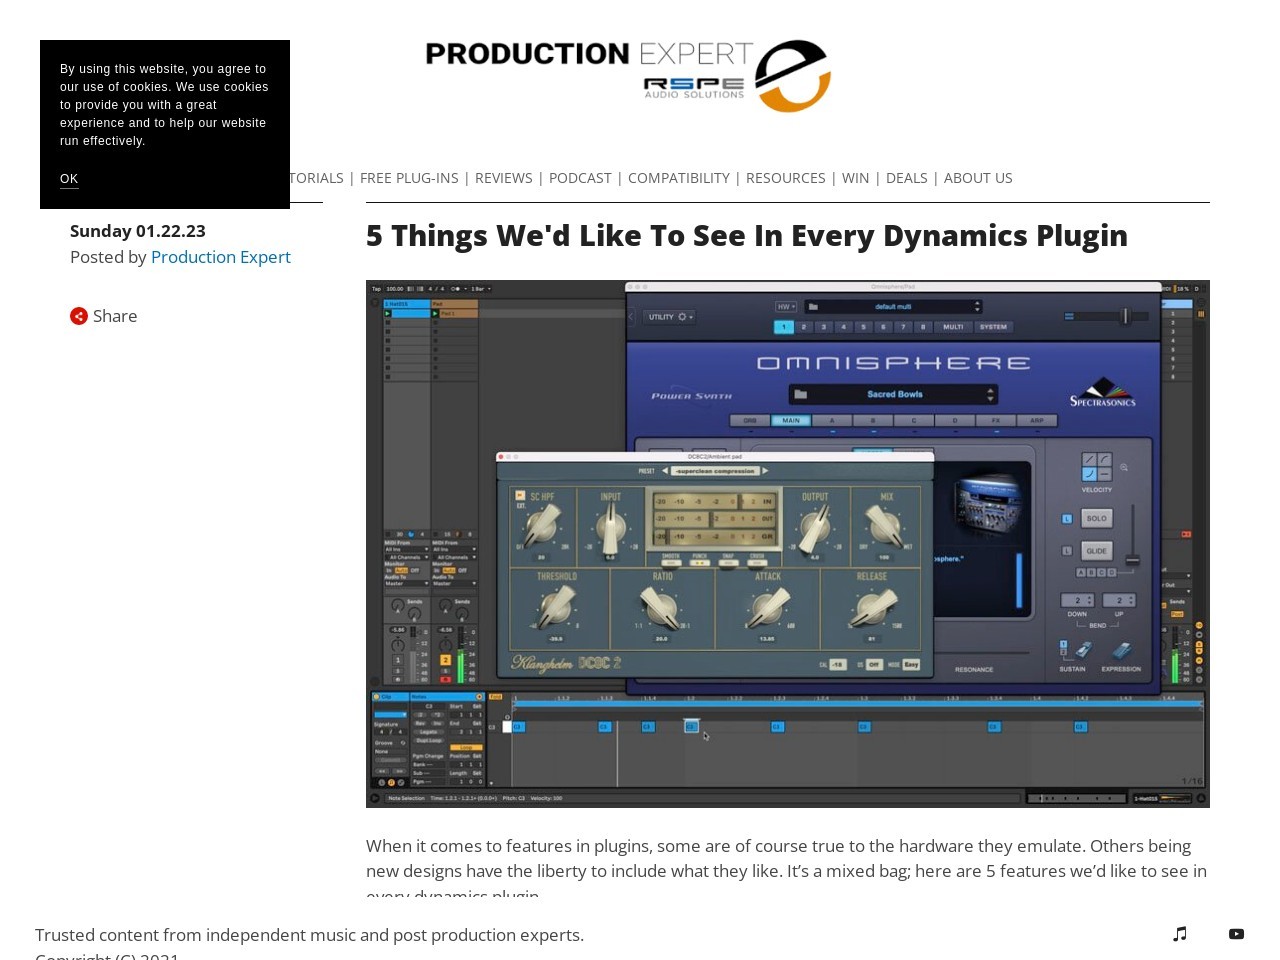 5 Things We'd Like To See In Every Dynamics Plugin | Production Expert